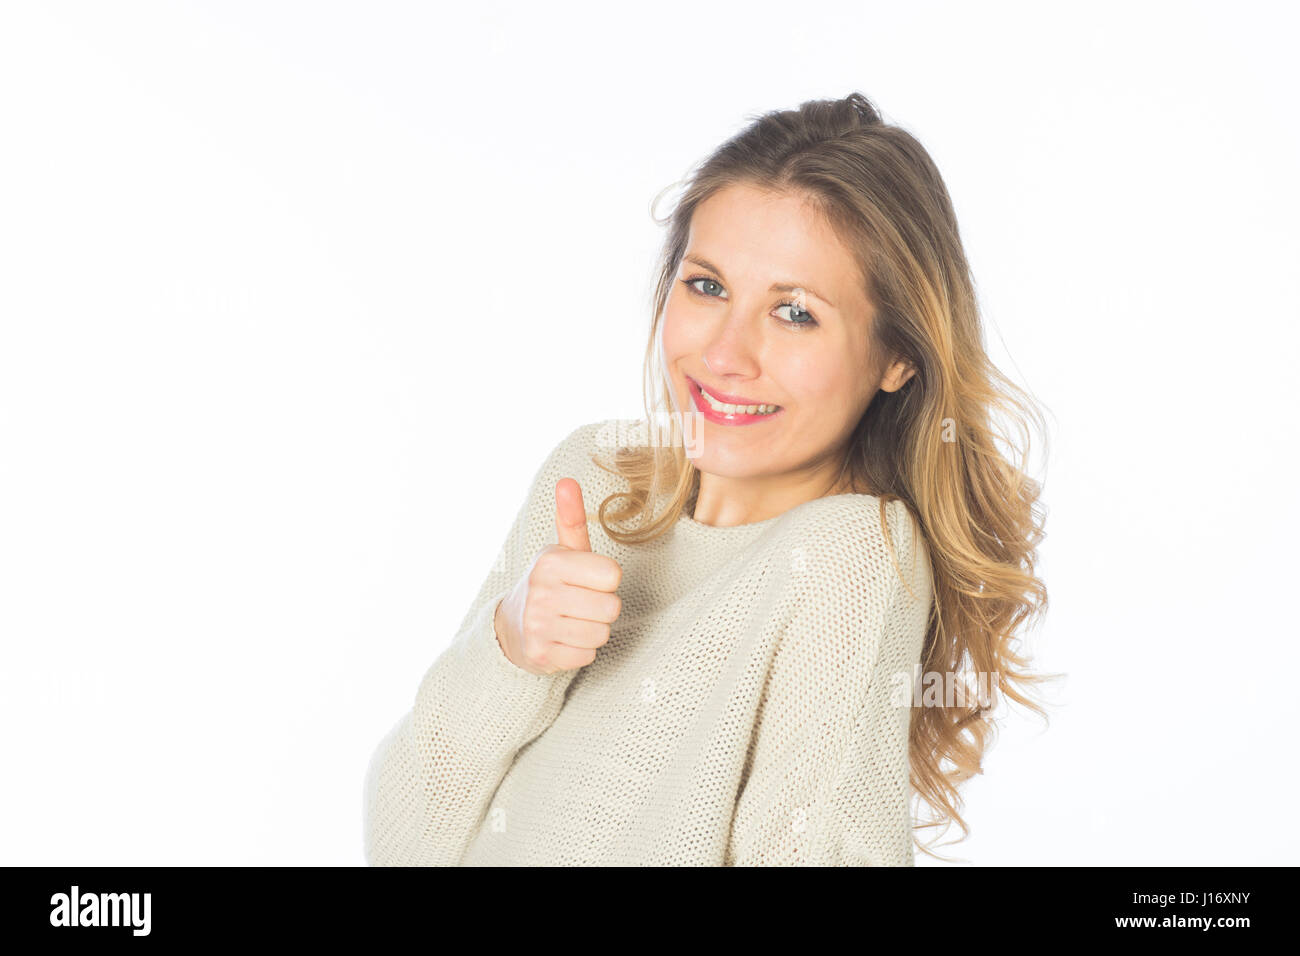 Beautiful blond woman showing a thumbs up gesture smilingt against a white background Stock Photo